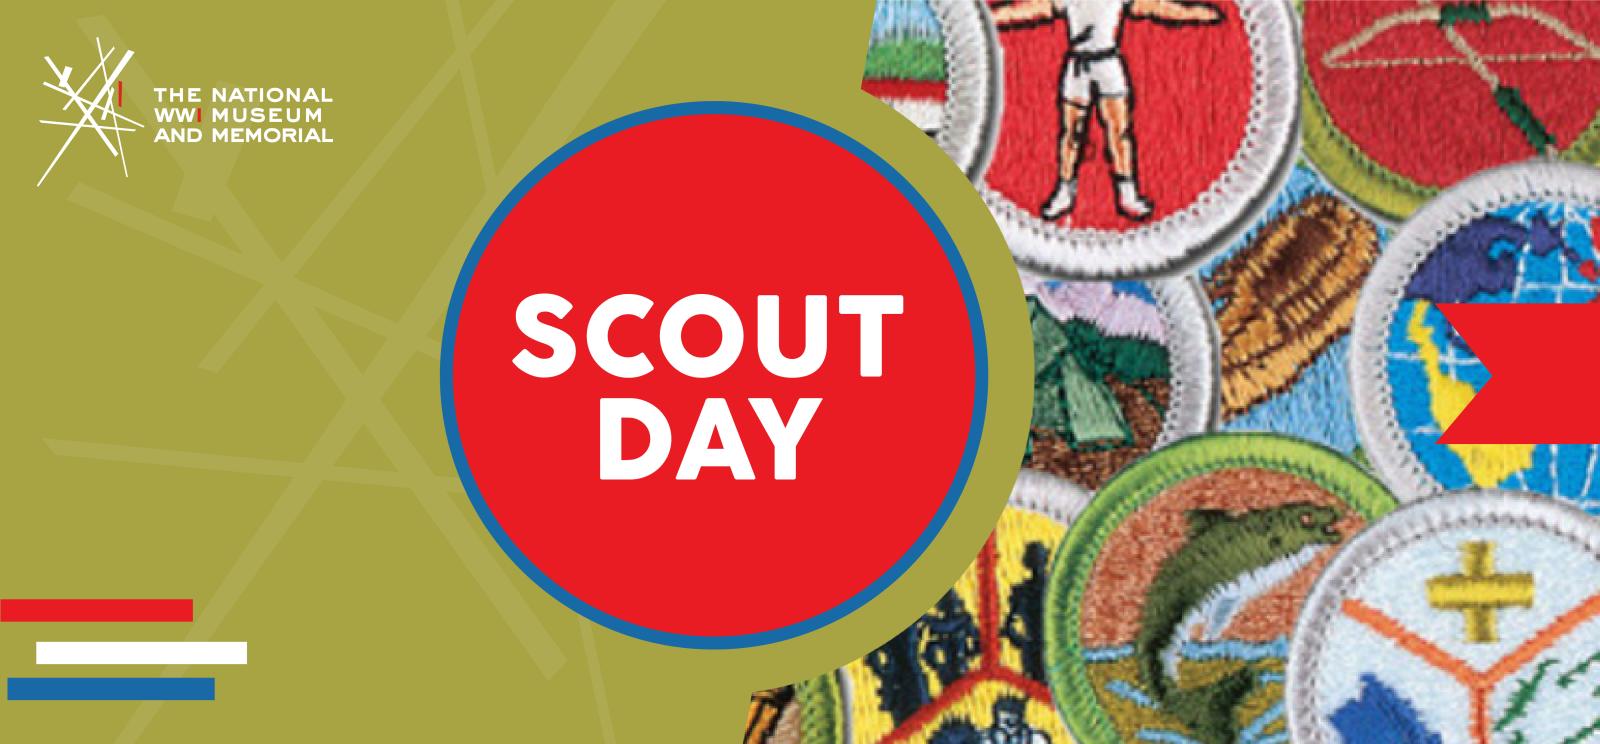 Image: Boy Scout badges layered on top of each other. Text: Scout Day